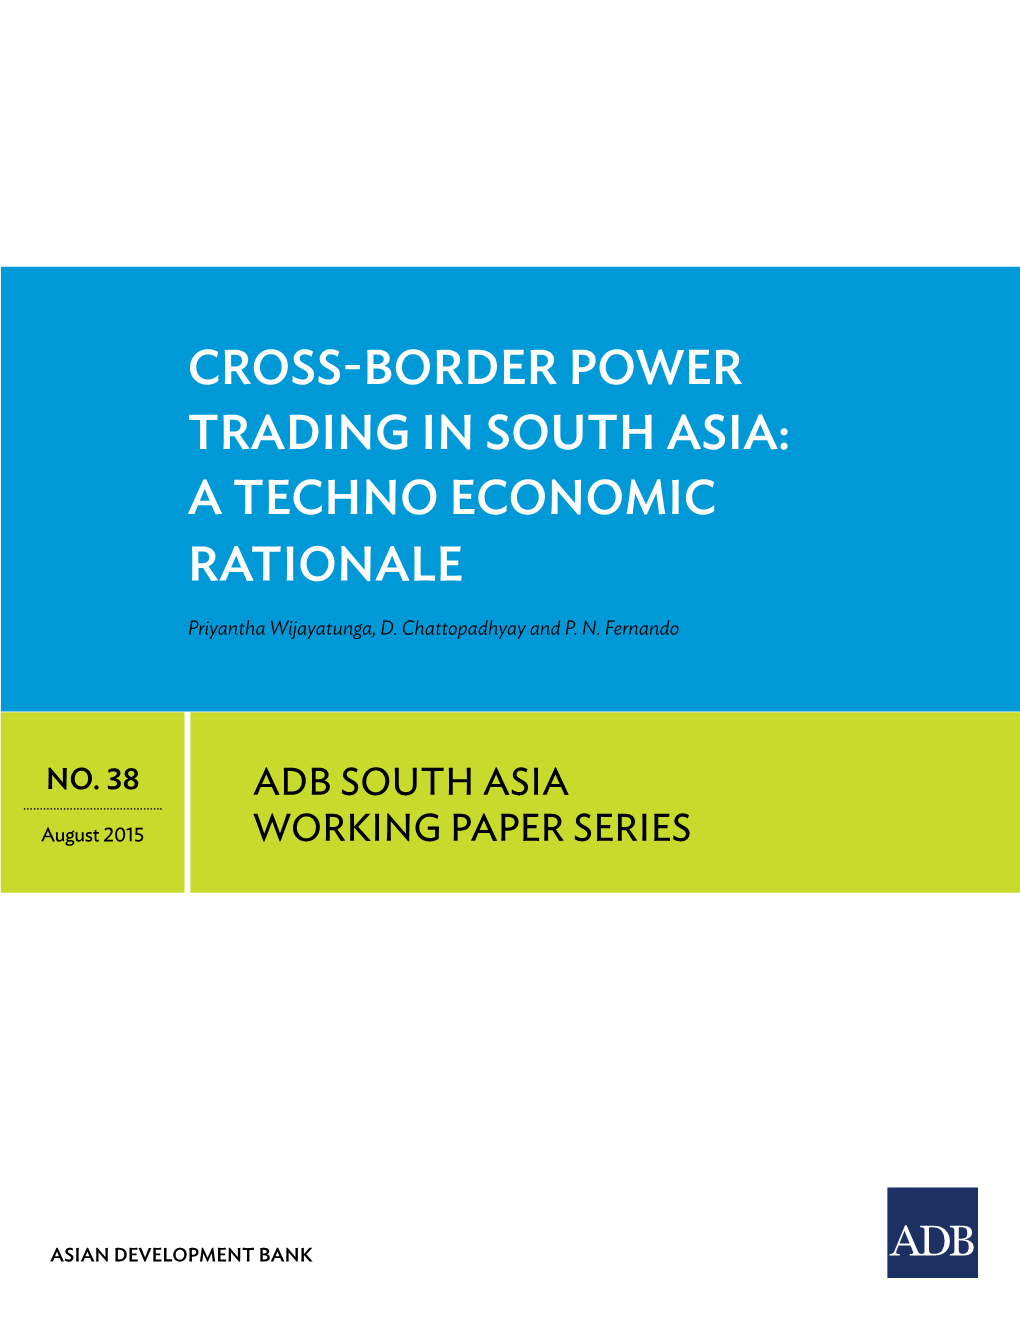 Cross-Border Power Trading in South Asia a Techno Economic Rationale